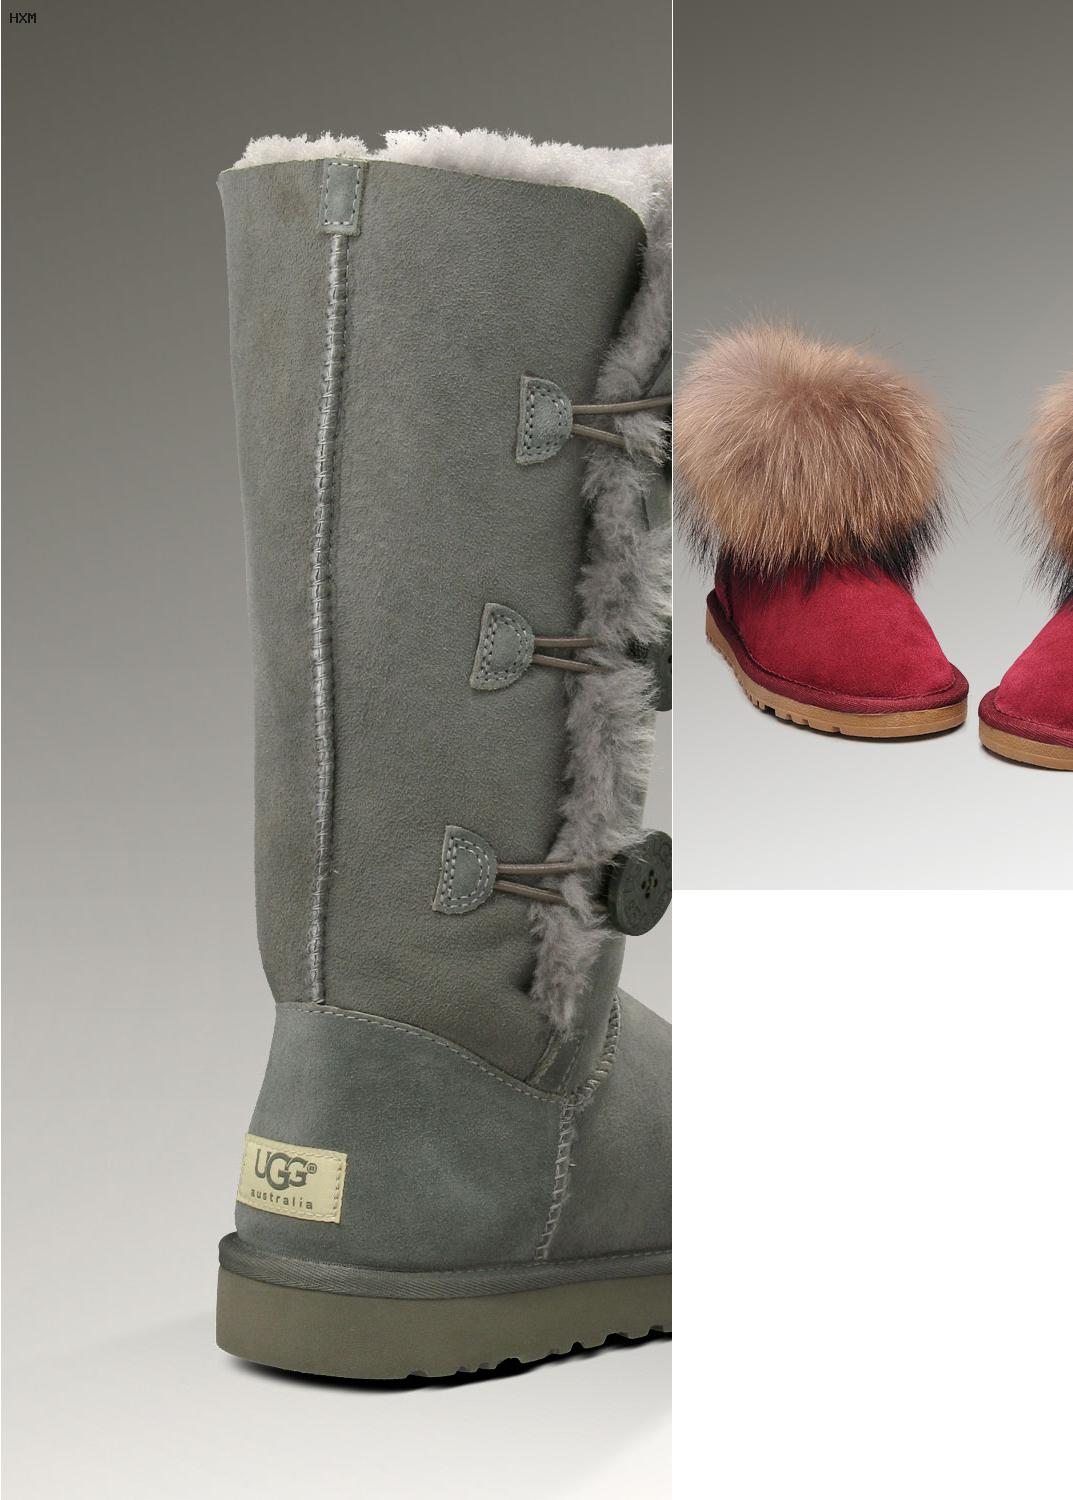 ugg clogs with fur lining